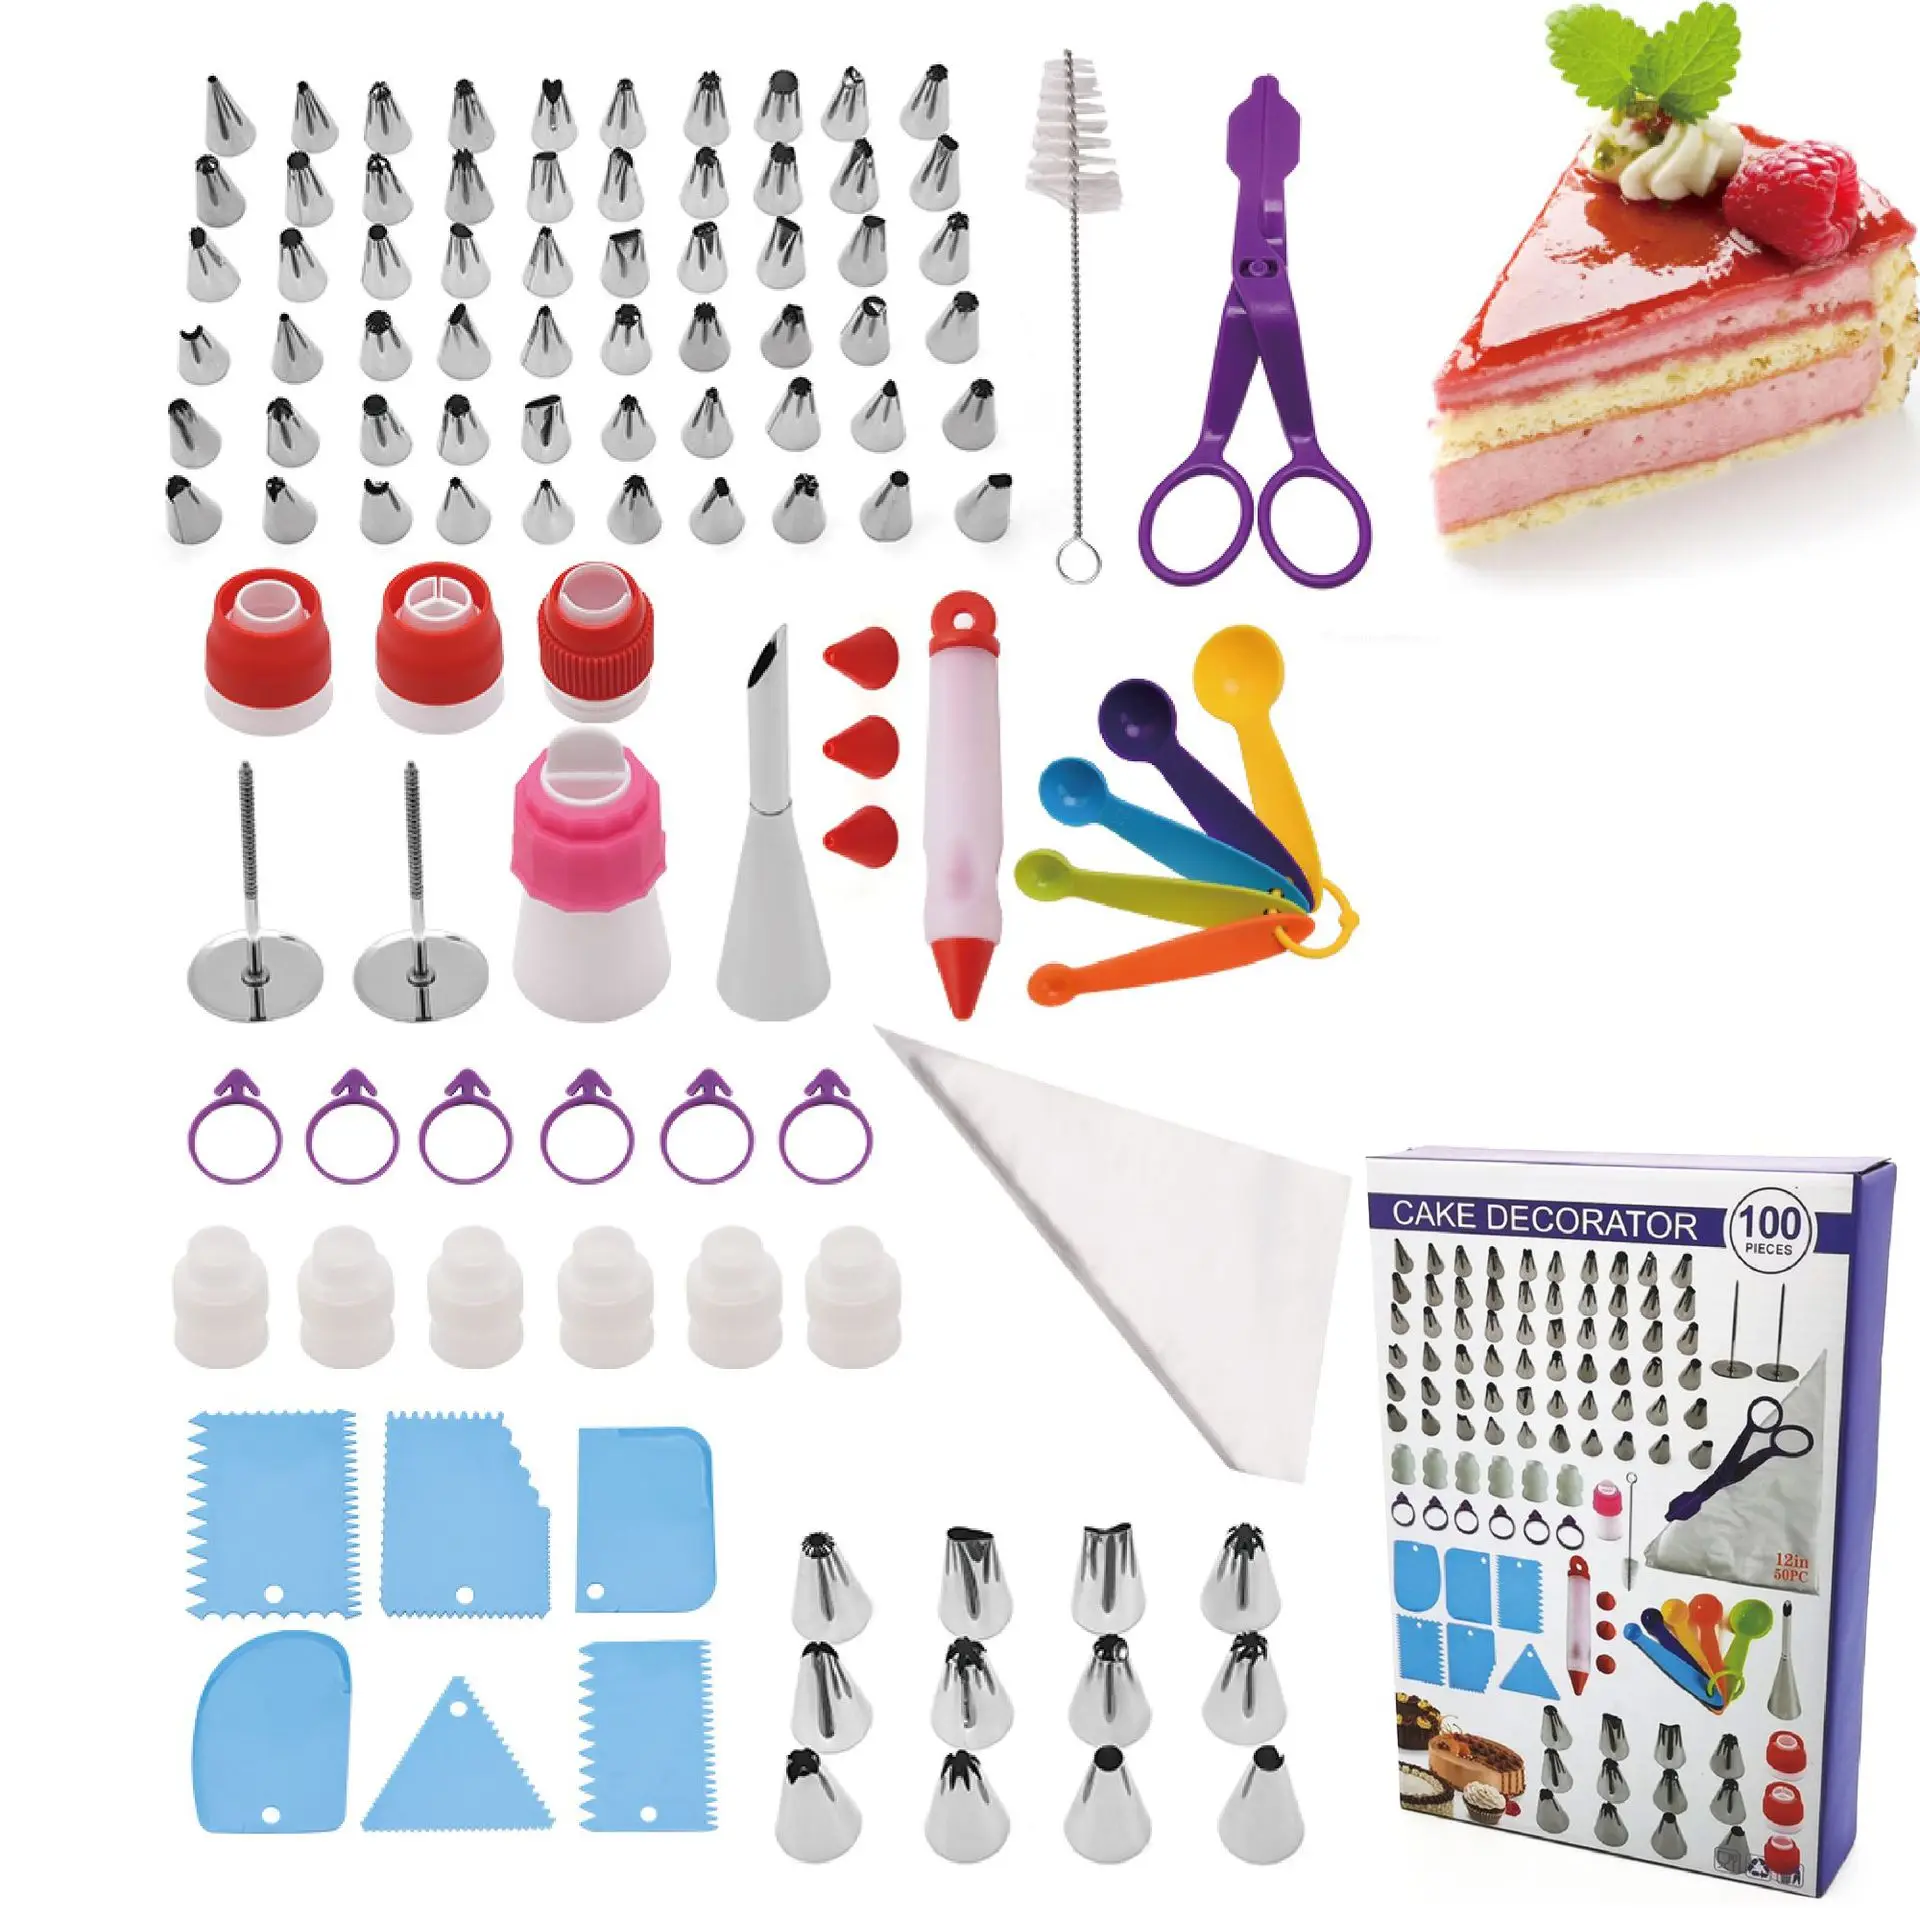 

New Cake Decorating Tools Accessories Cup Frosting Piping Bag 100 Pcs Piping Set Durable Kitchen Cake Tools Cake